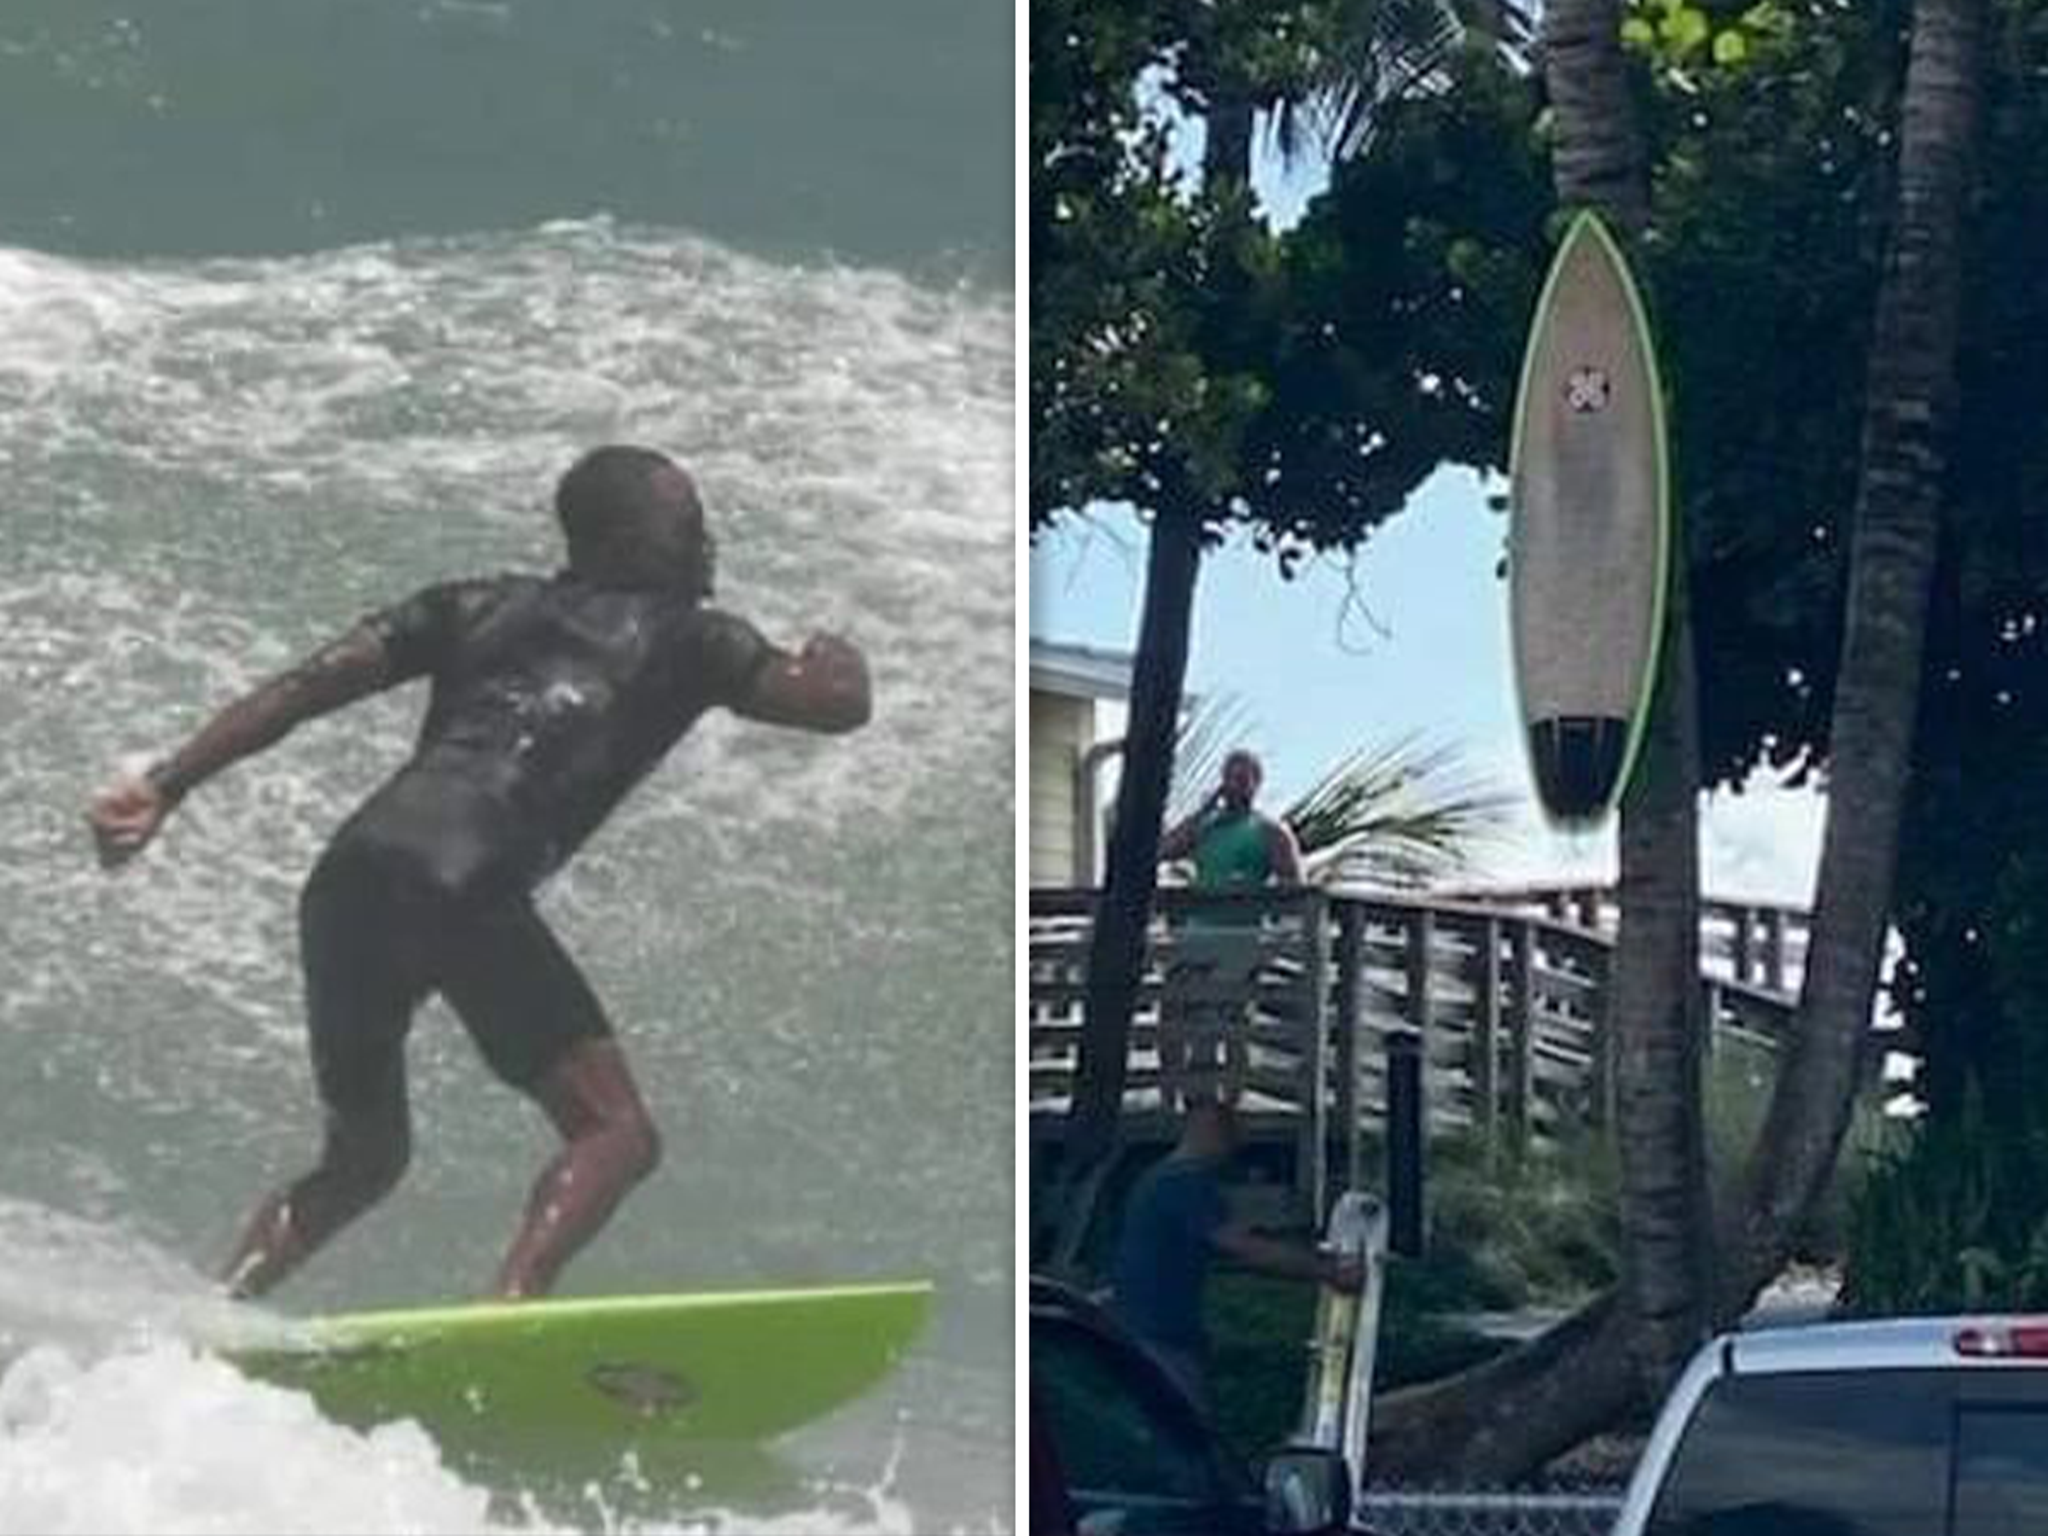 Black Surfers Refuse to Be Excluded: 'I Have a Right to Be on This